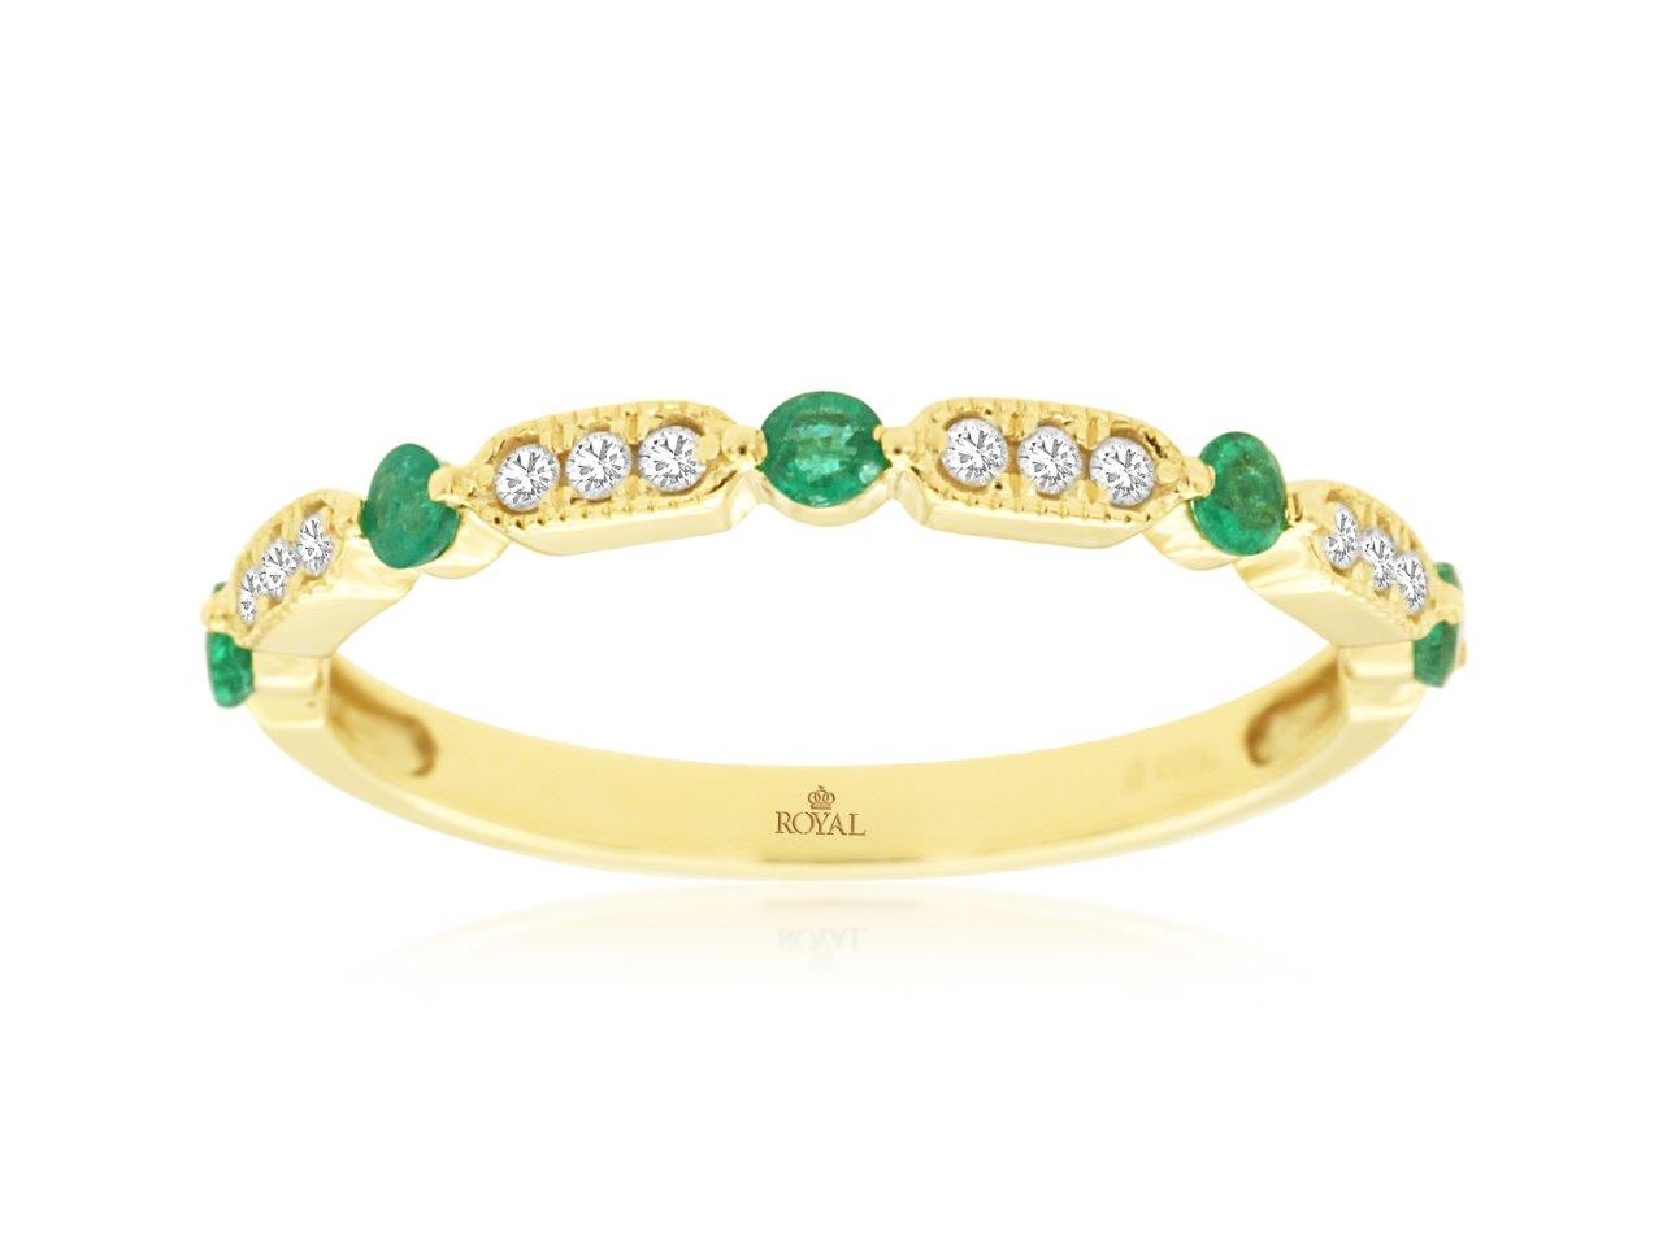 14K Yellow Gold Emerald Ring with Channel Set Diamonds Size 7
.1CT Diamonds and .22CT Emeralds
H1686EM